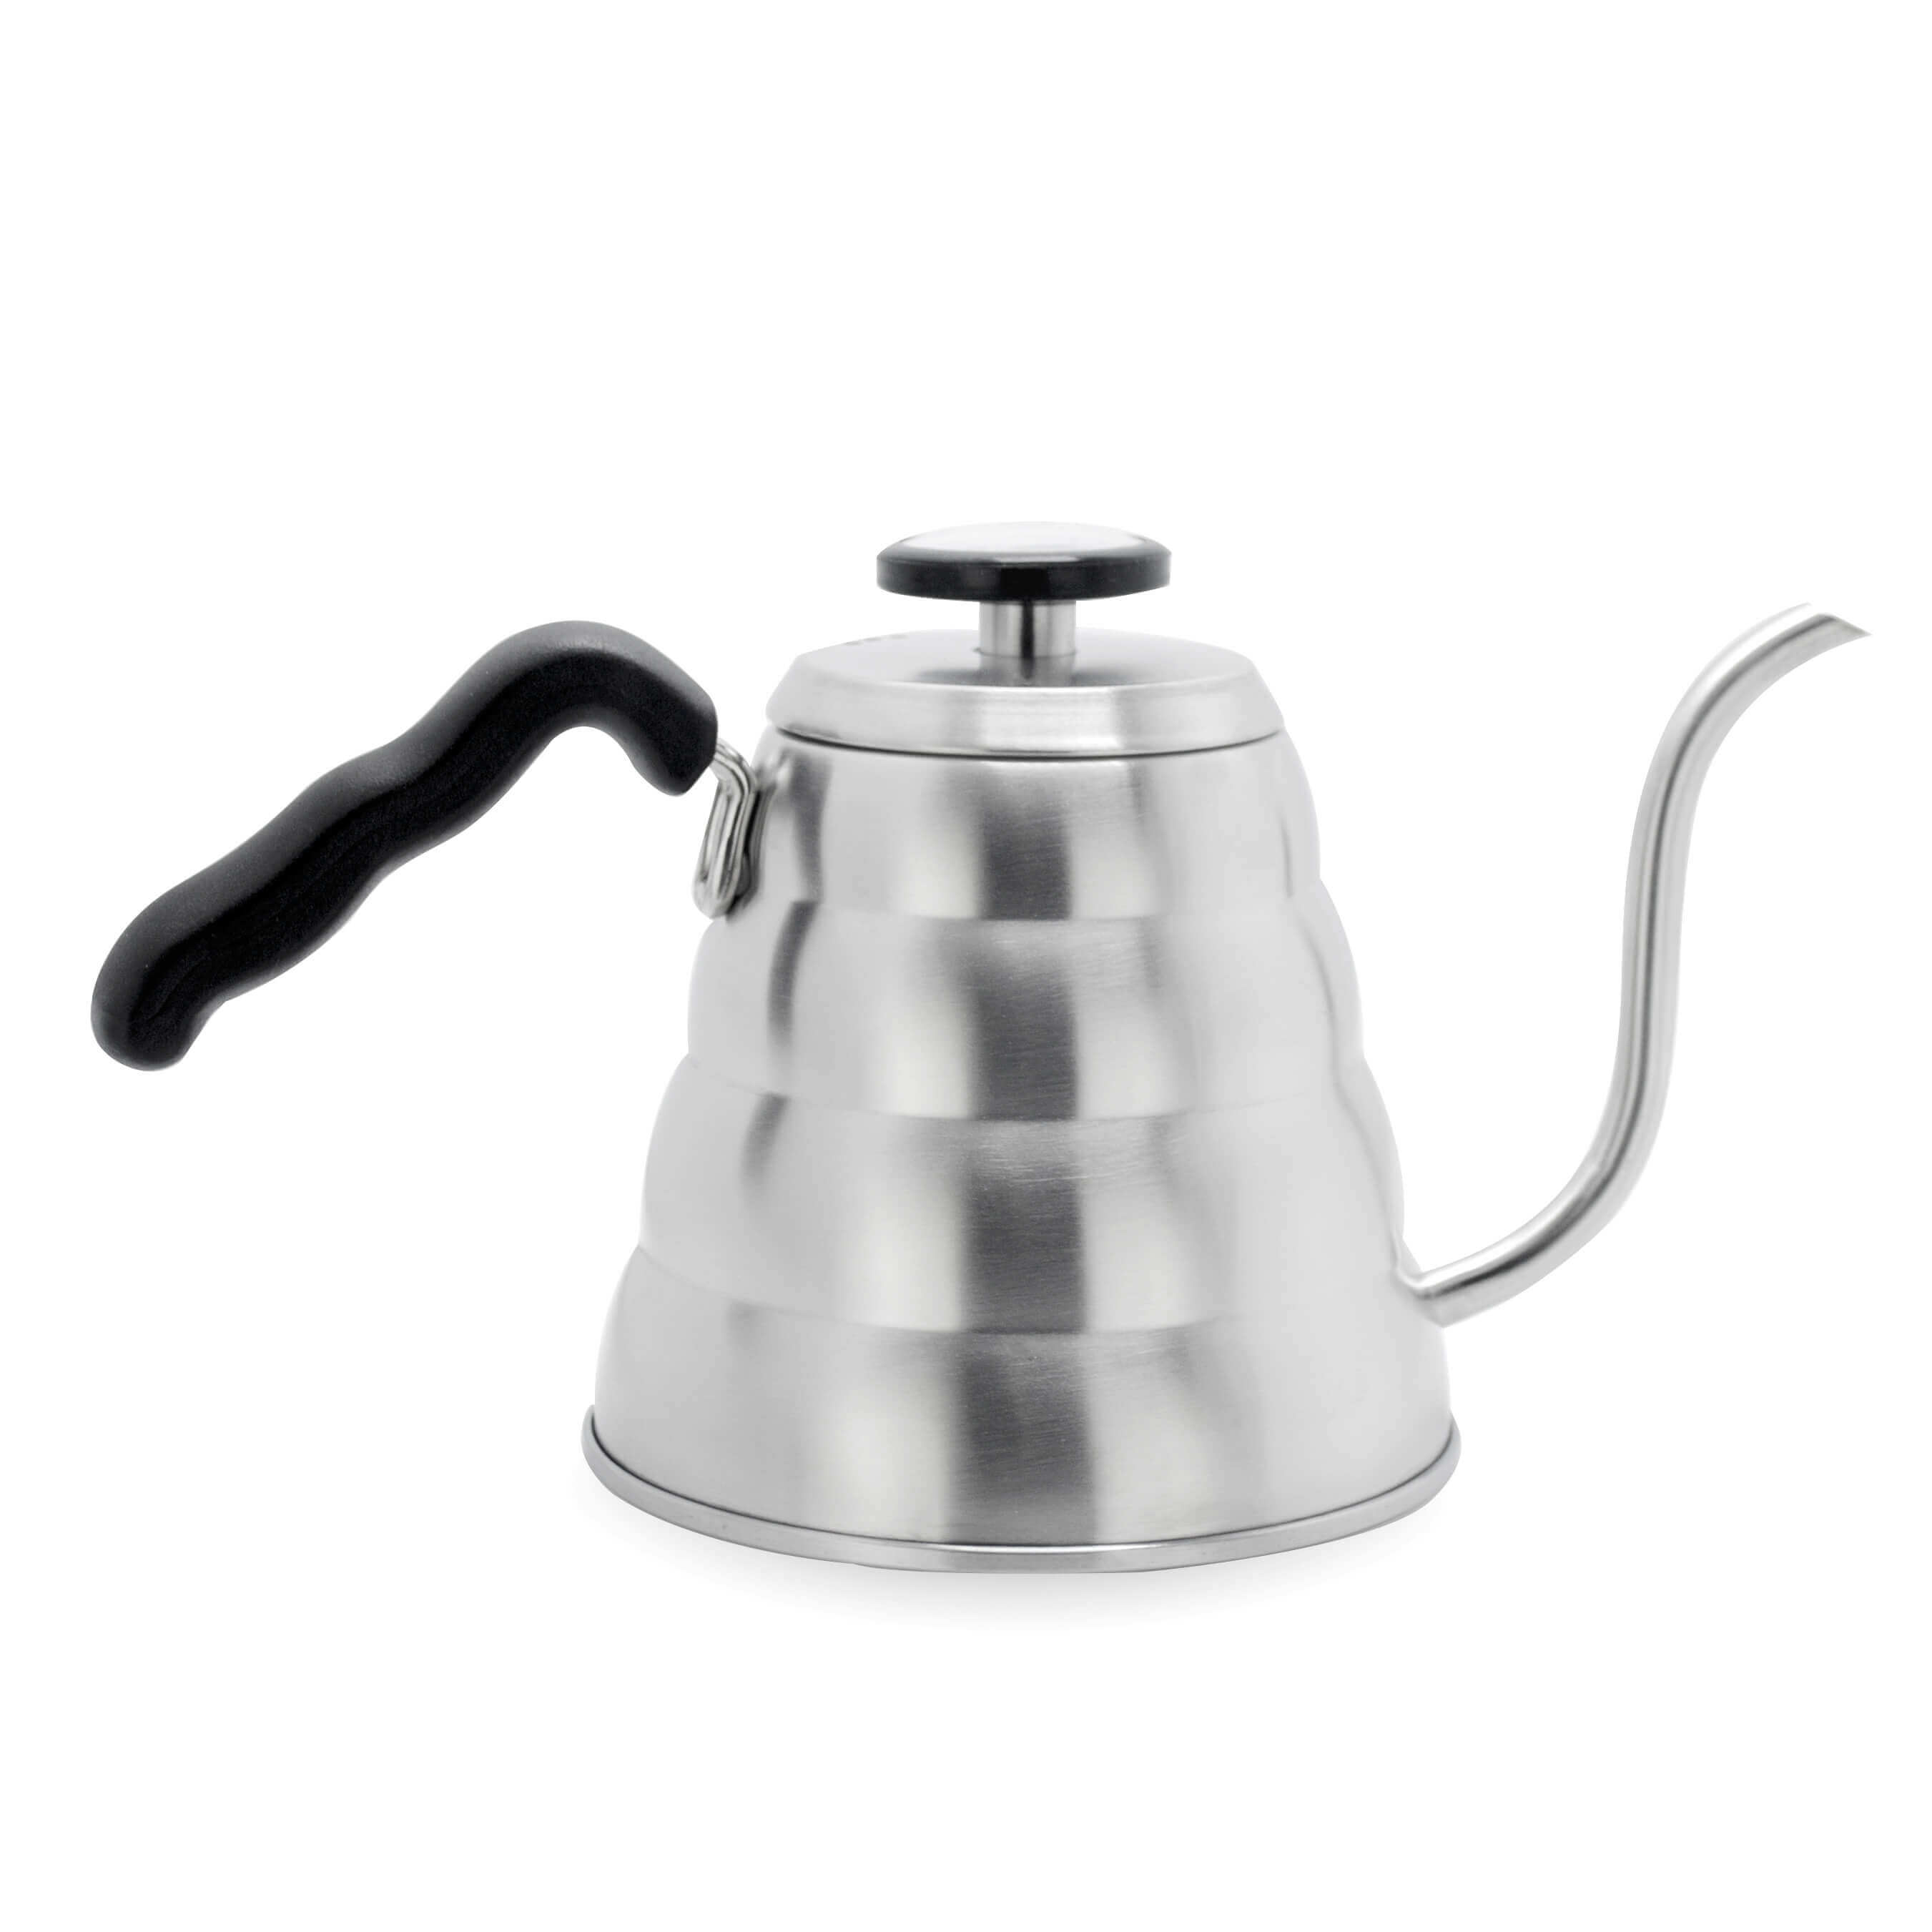 Stainless Steel Gooseneck Kettle 1.2L - Kitchables